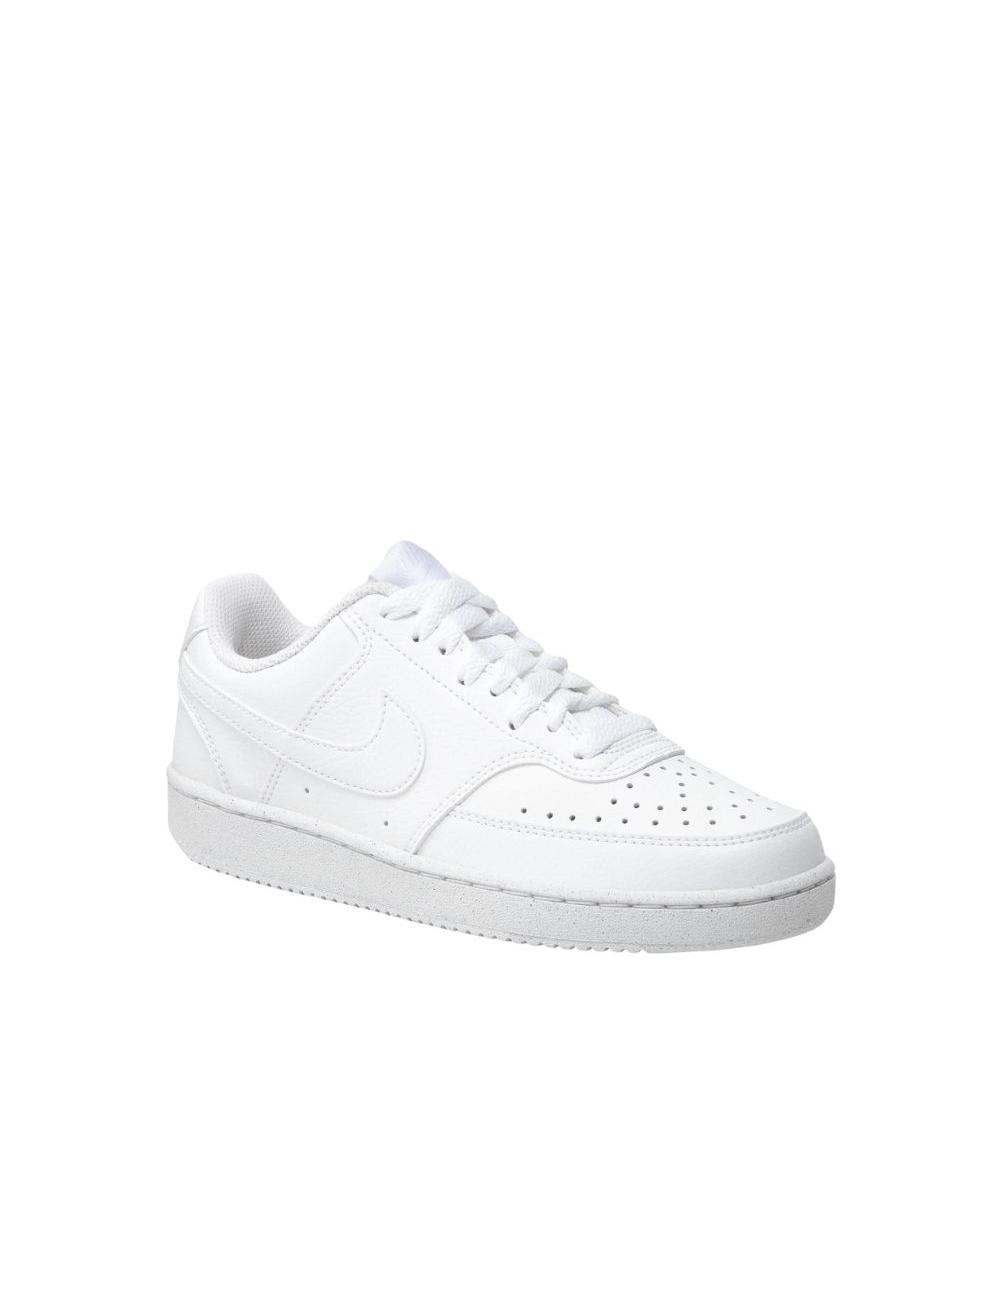 ZAPATILLA DEPORTIVA BLANCA  MUJER Nike Court Vision Low BE DH3158 100